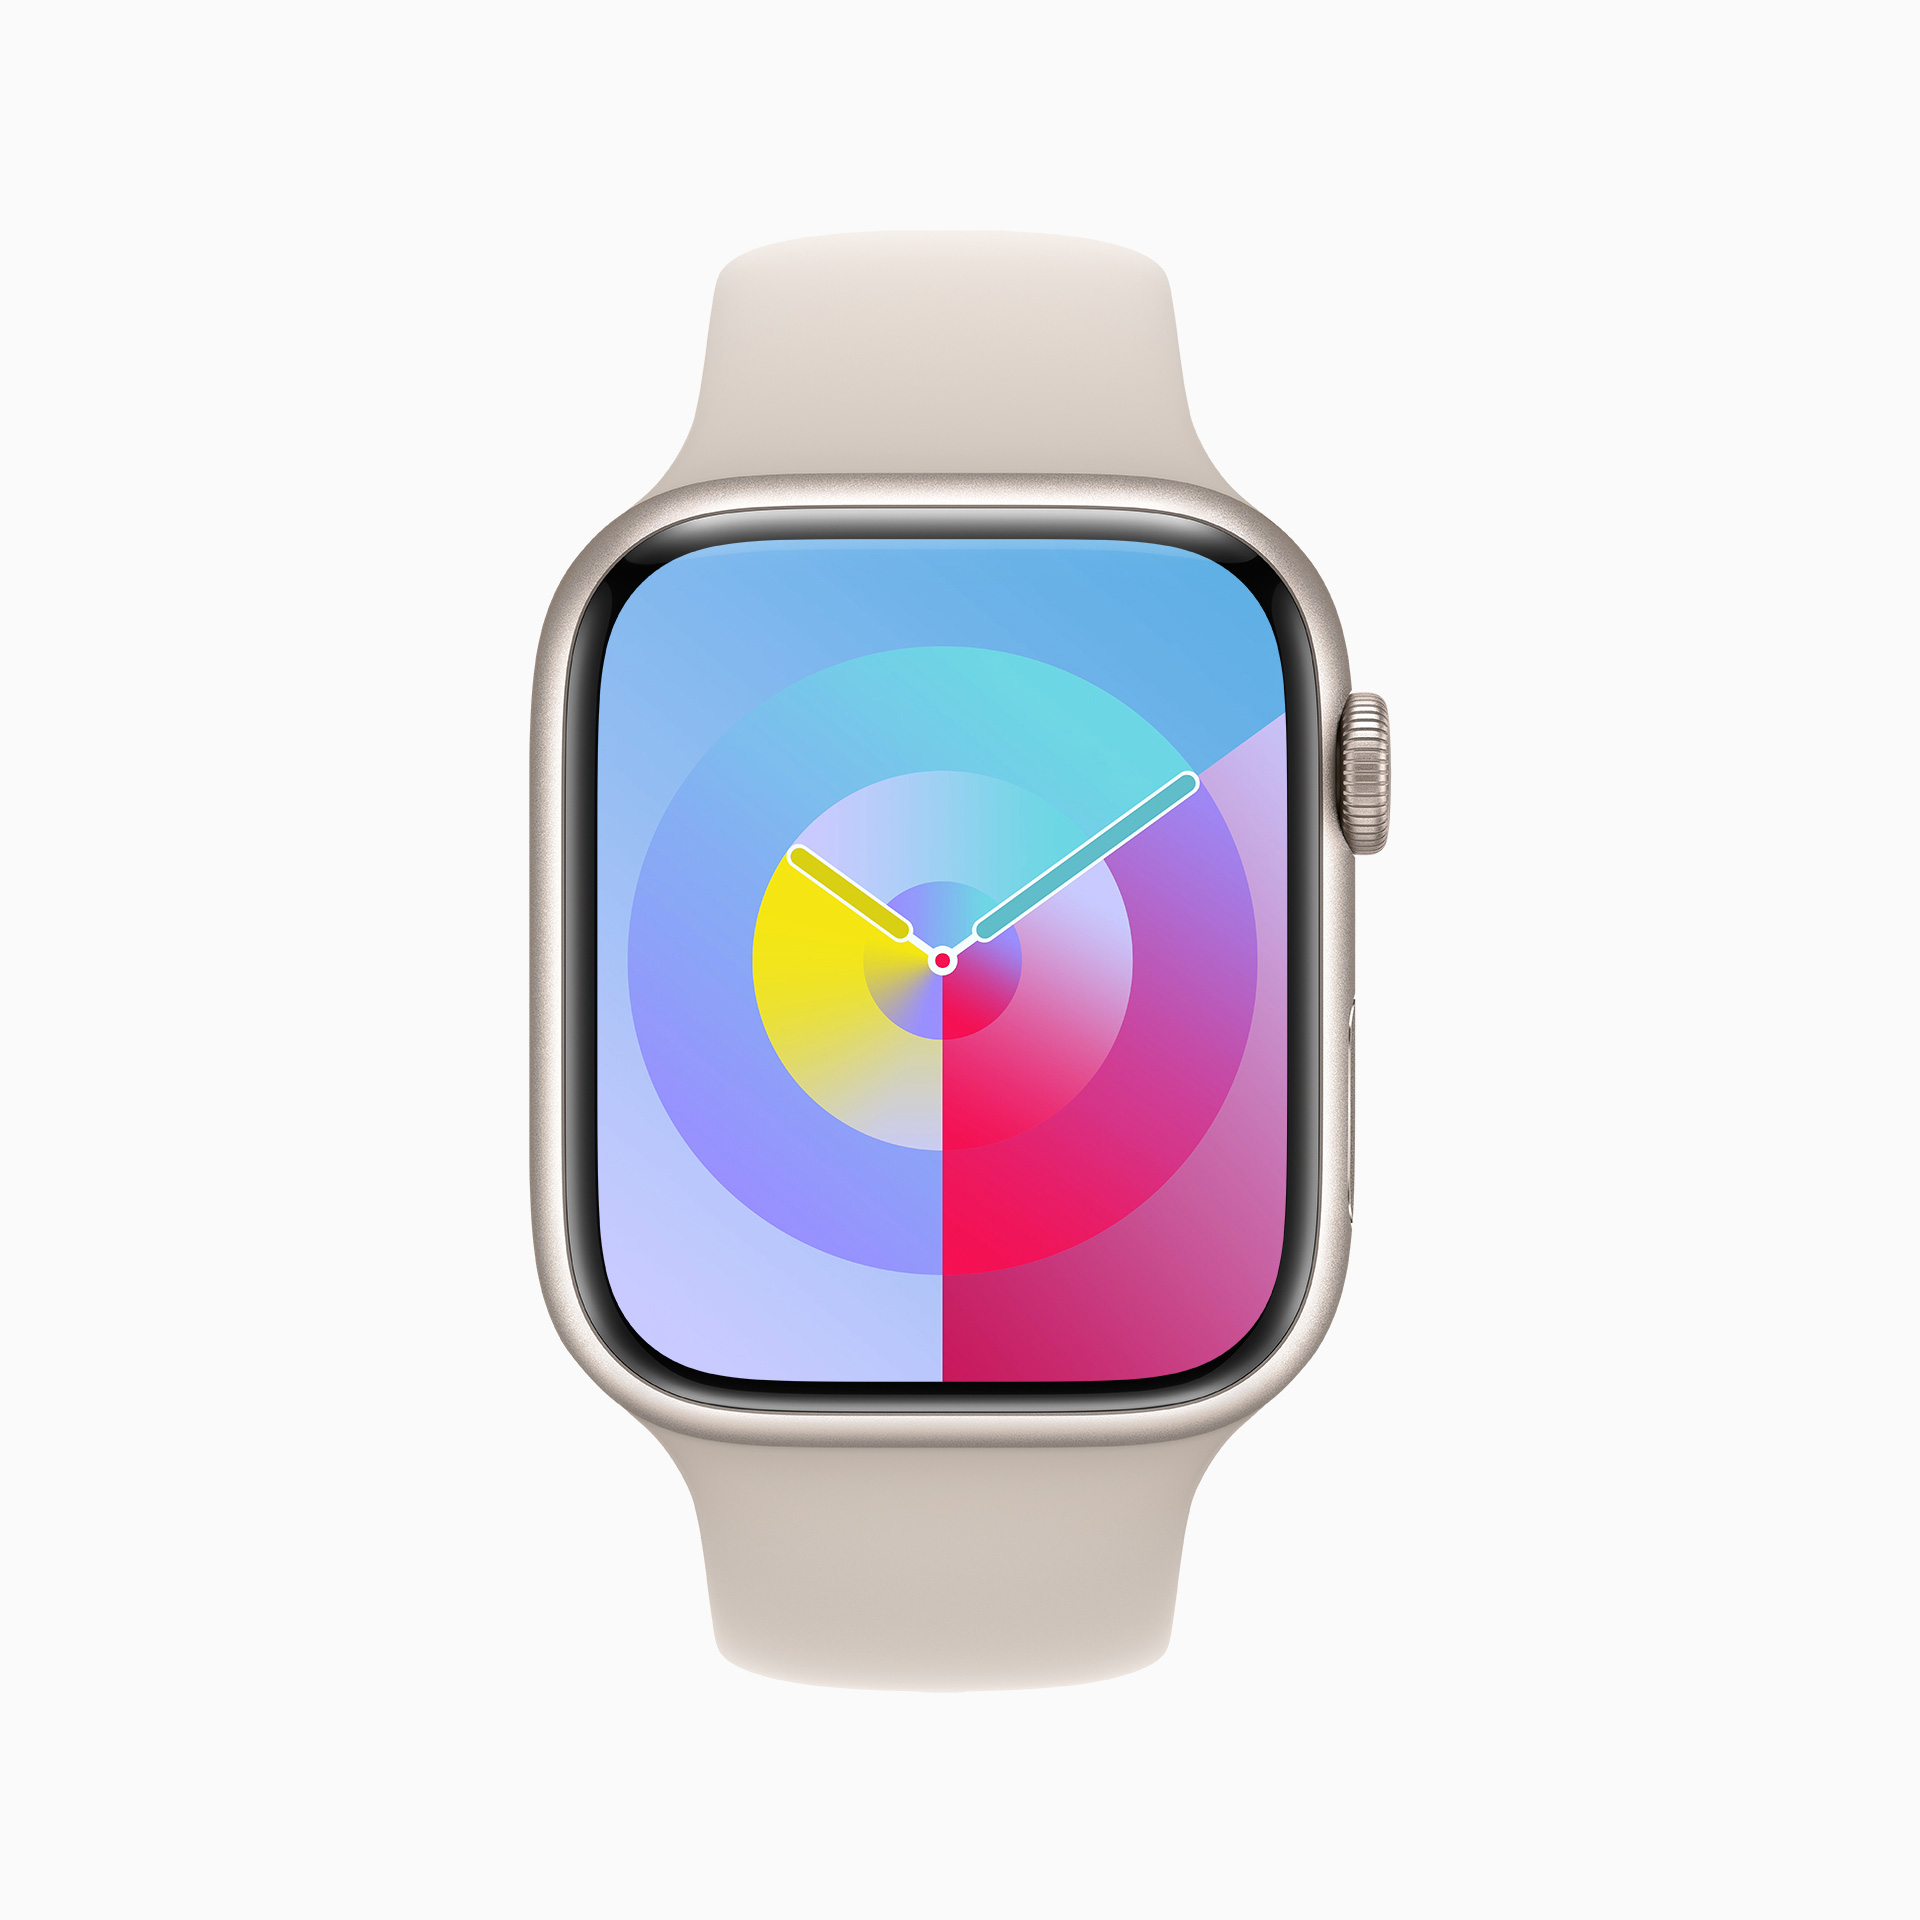 Introducing watchOS 10, a milestone update for Apple Watch Apple